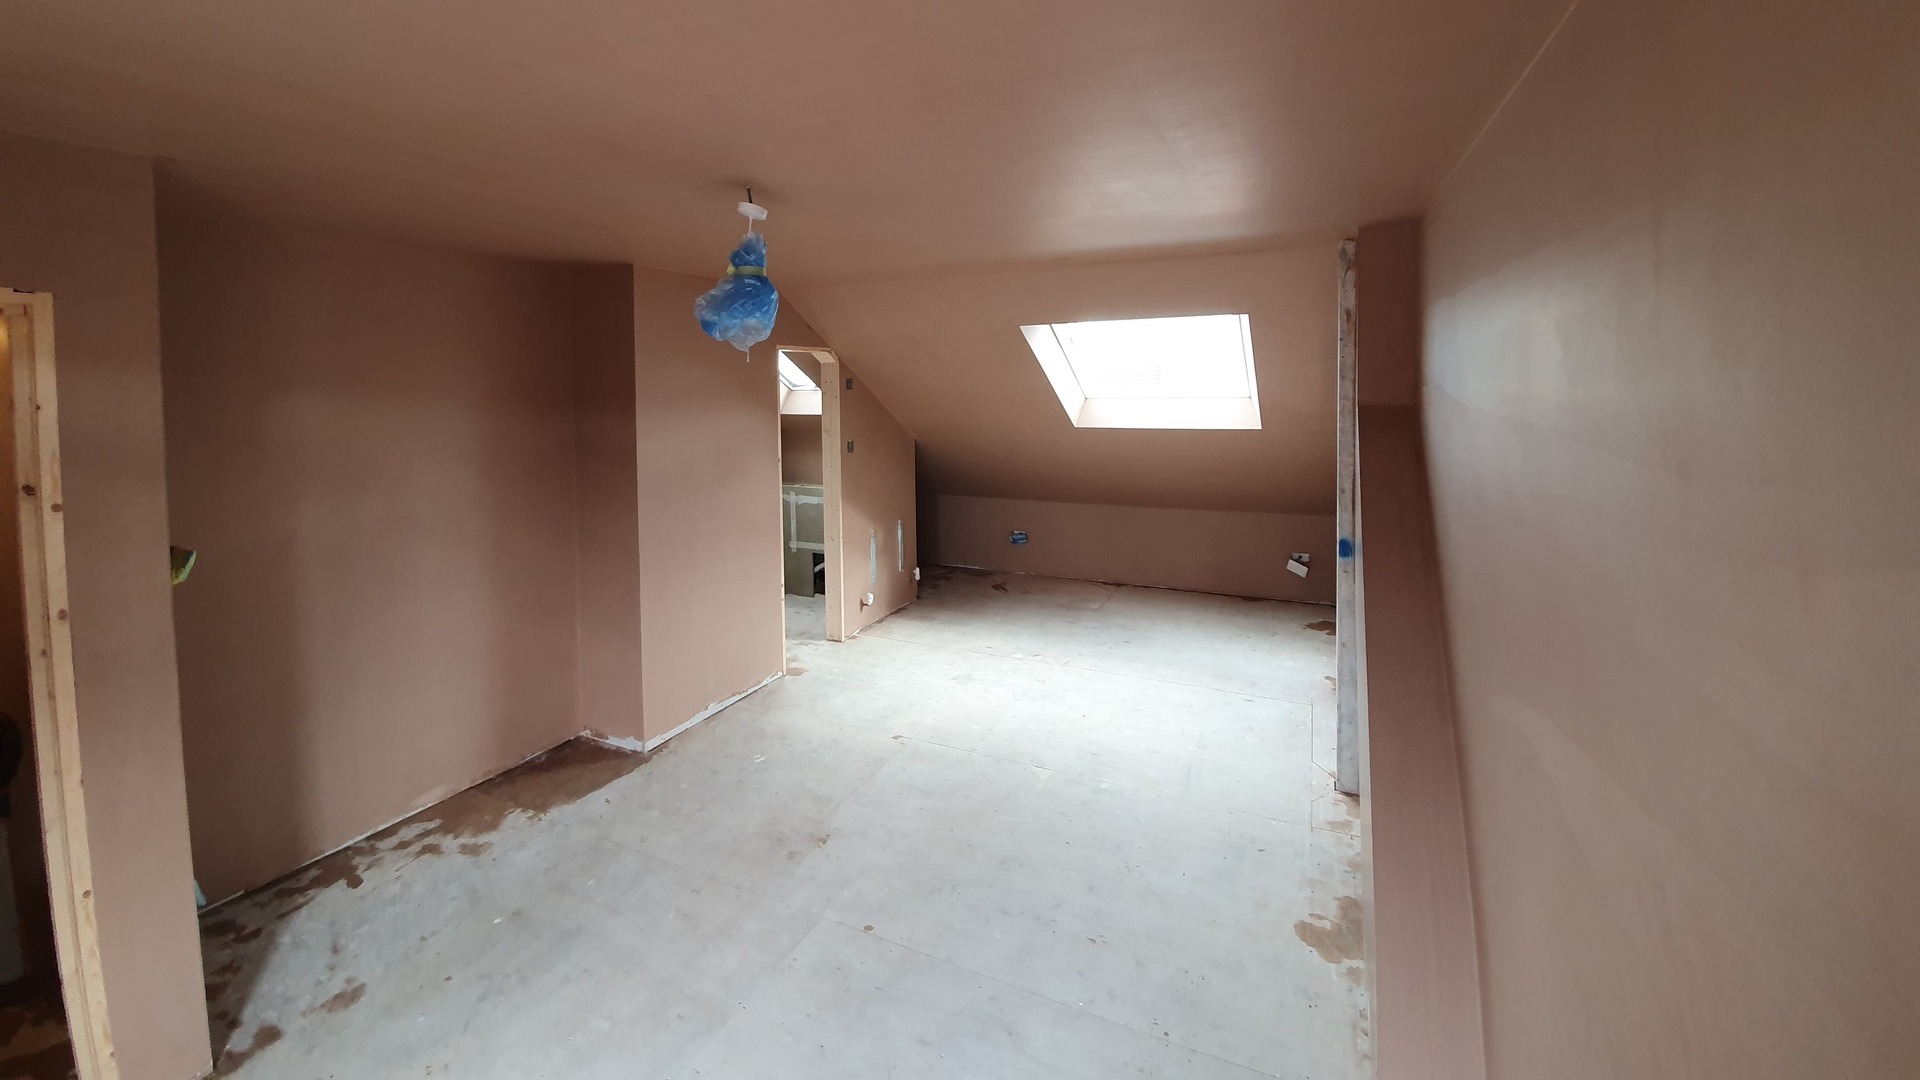 Bare room recently professionally plastered throughout